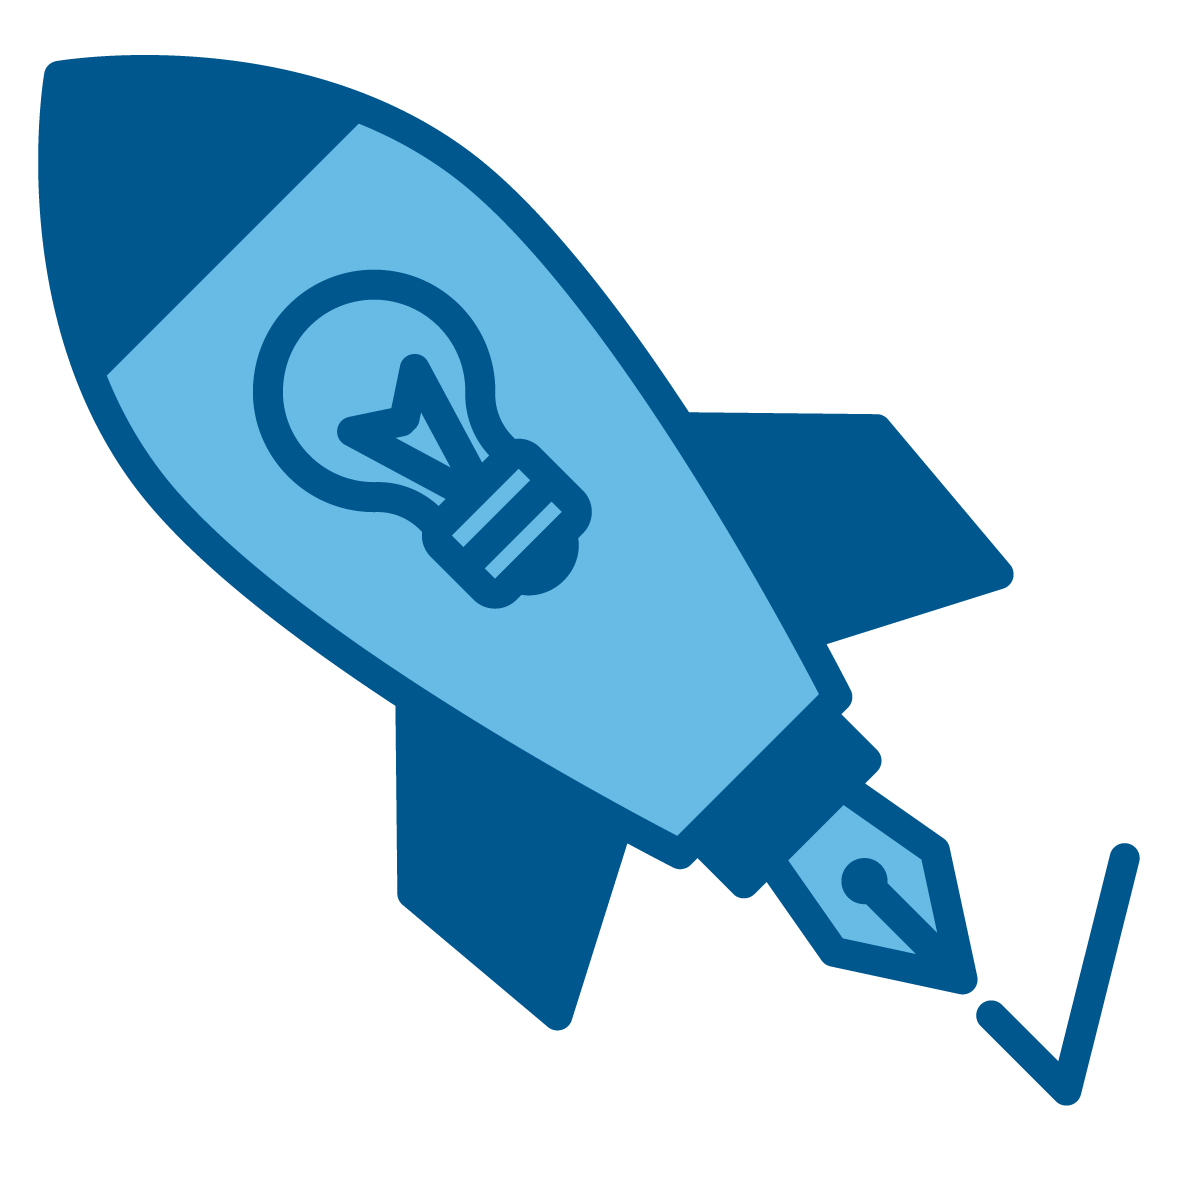 A rocket icon showing projects getting started in stage 4